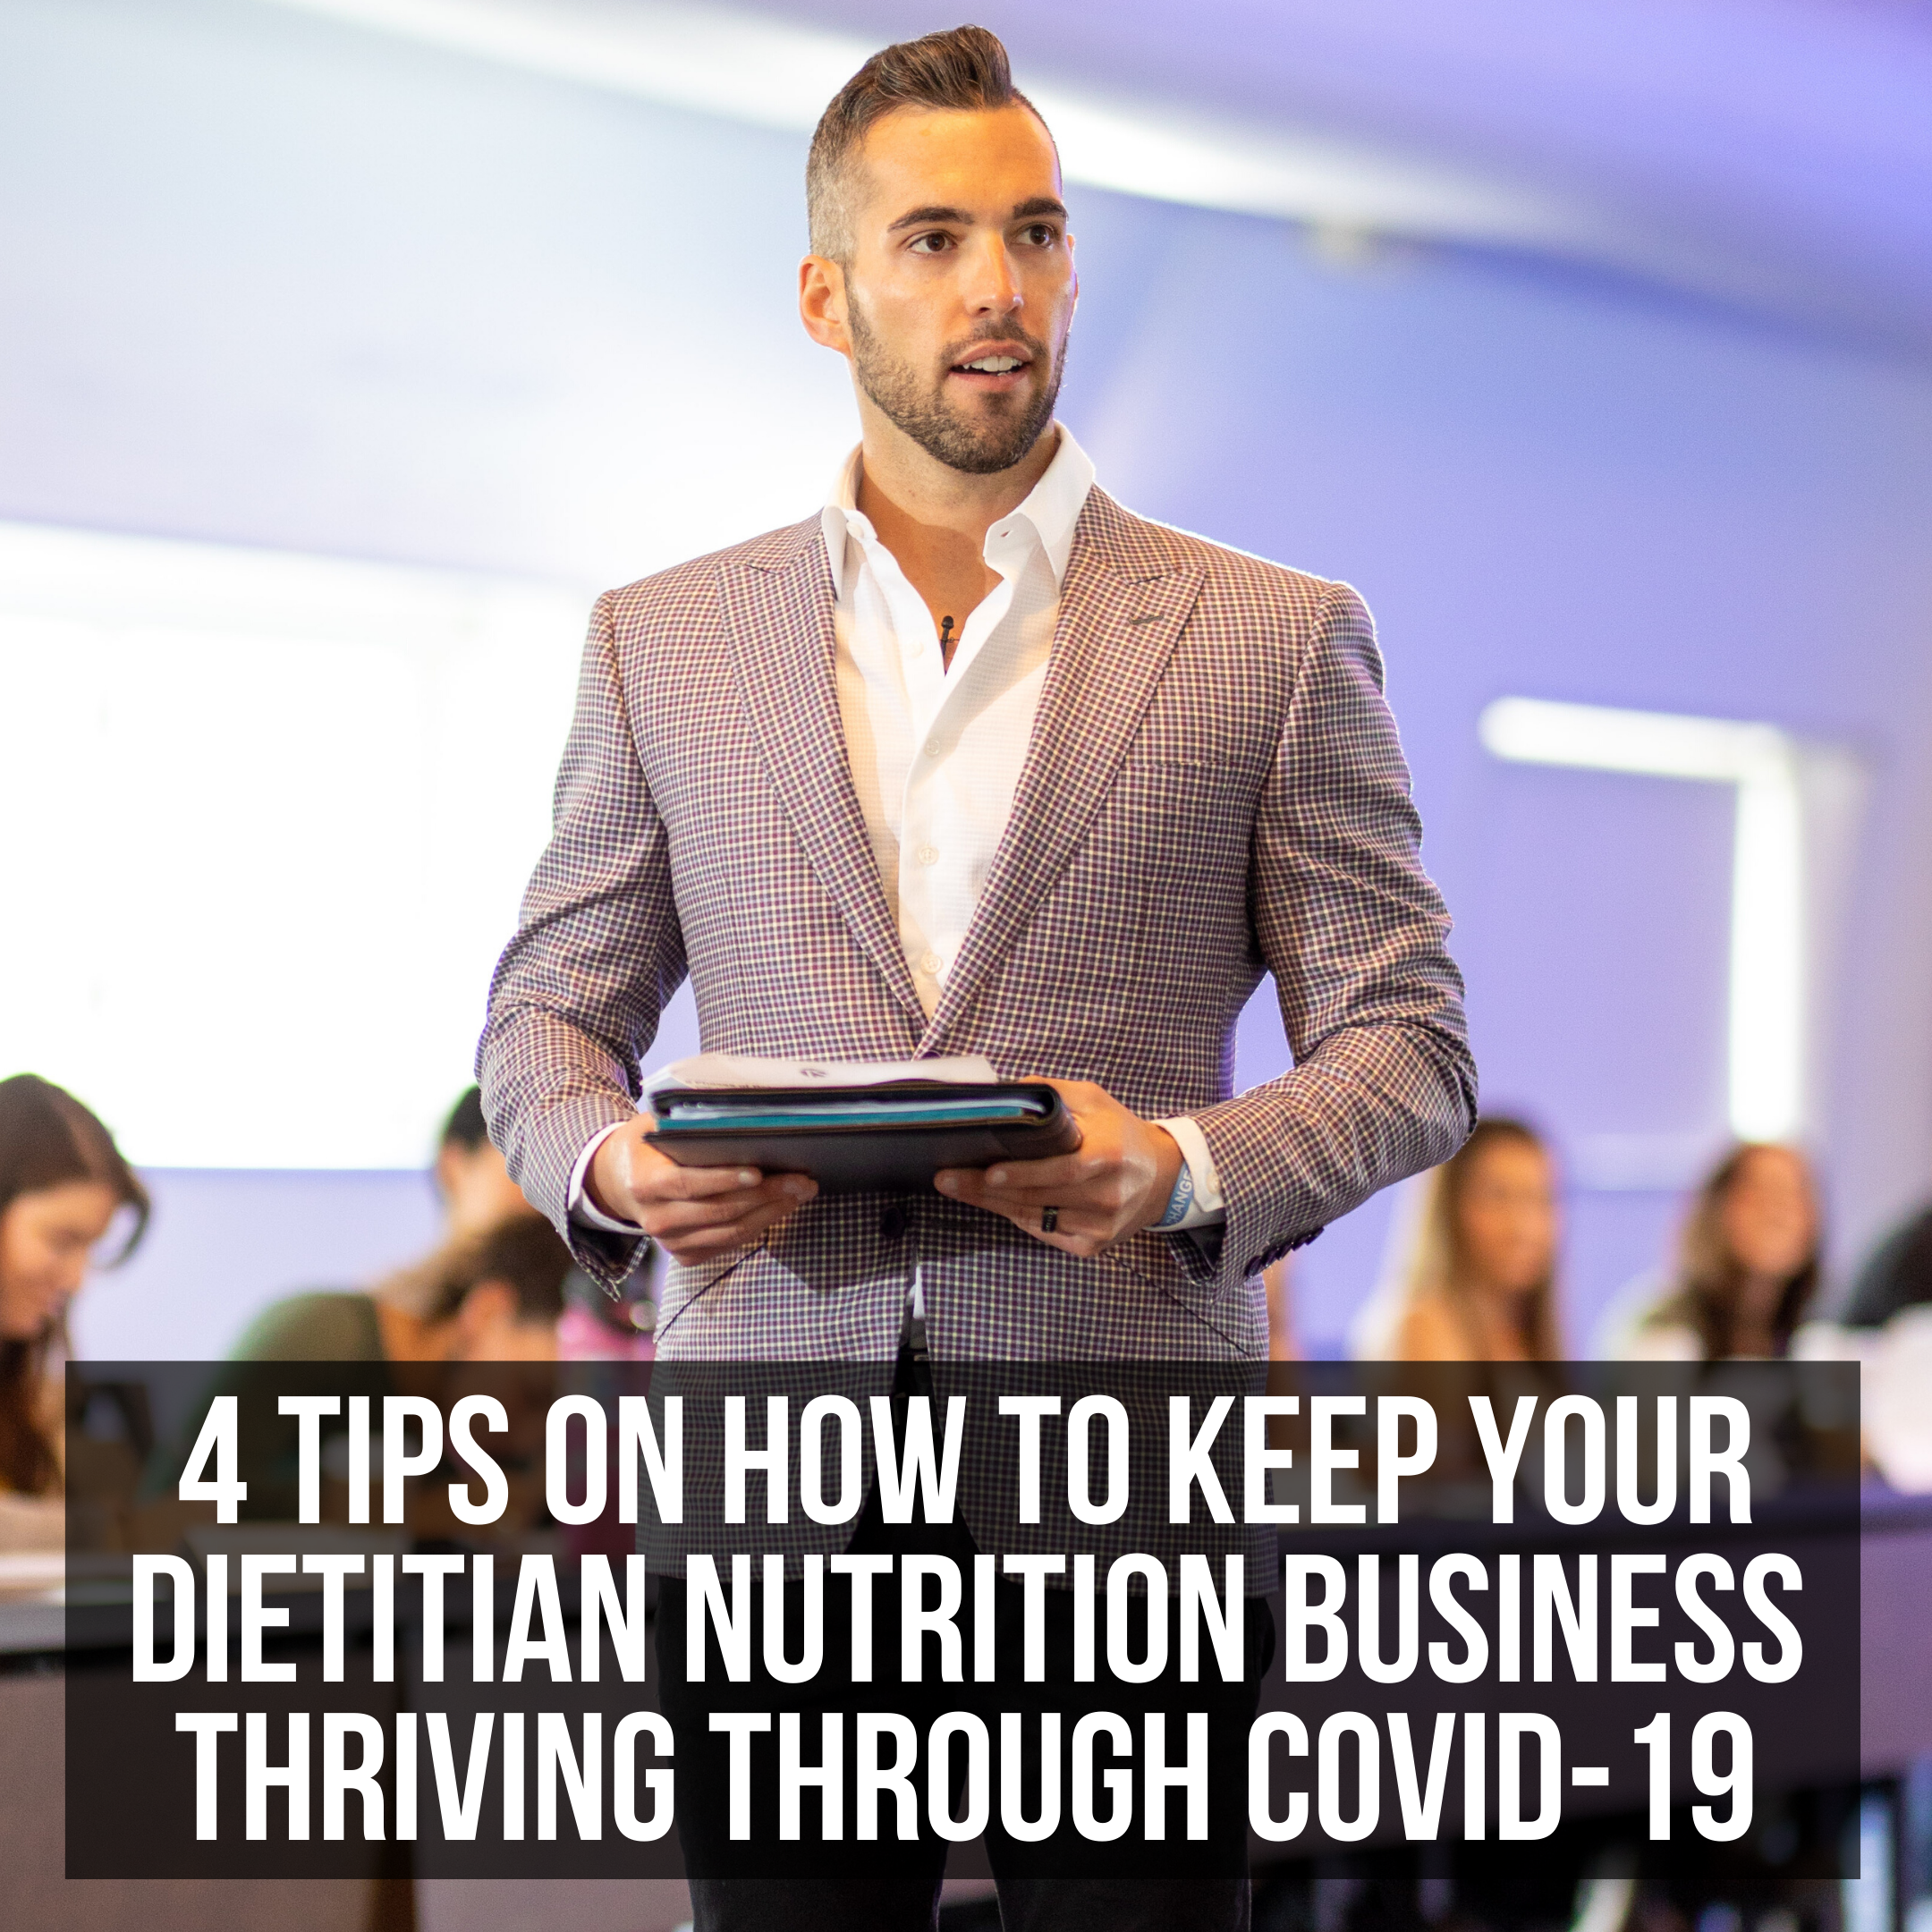 Tips On How To Keep Your Dietitian Nutrition Coaching Business Thriving Through COVID-19 from a Dietitian Business Coach